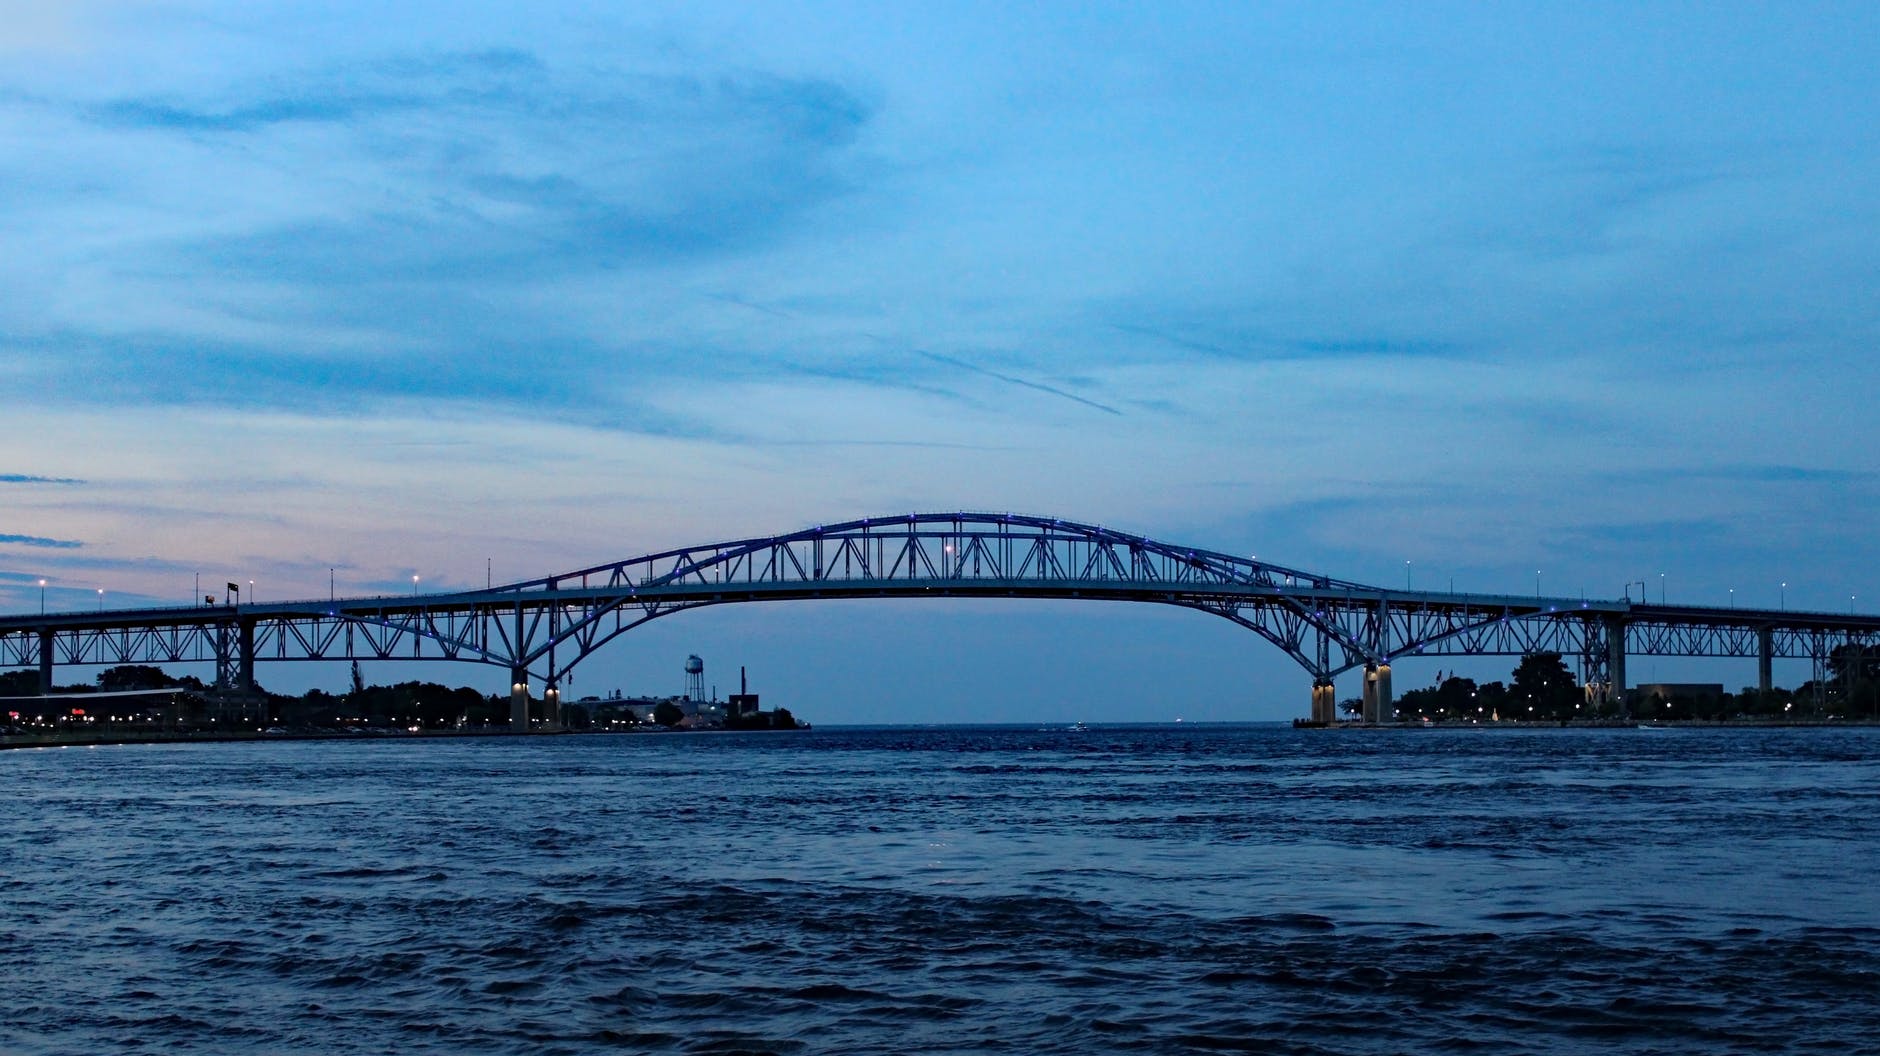 A bridge over one of the Great Lakes